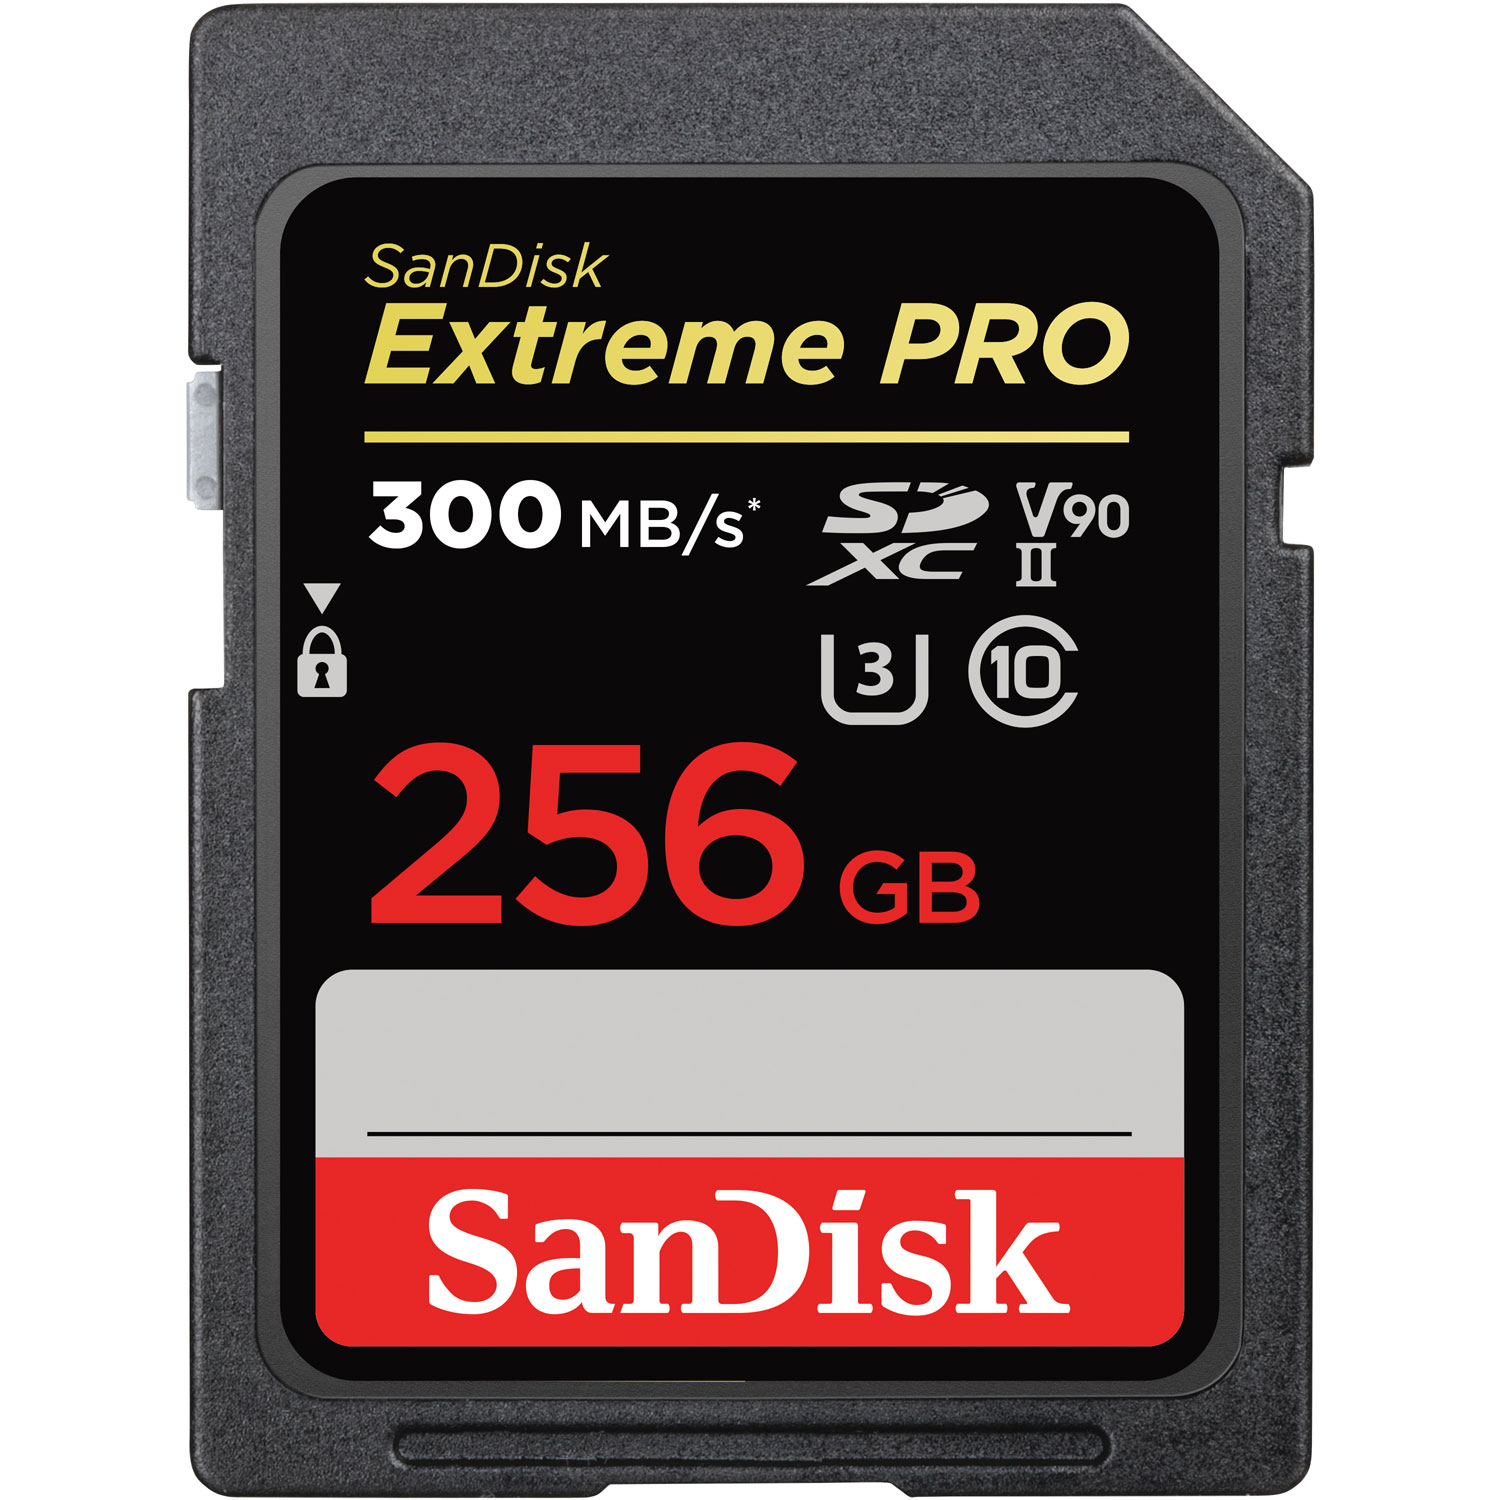 SanDisk Extreme Pro 256GB 300MB/s SDXC Memory Card